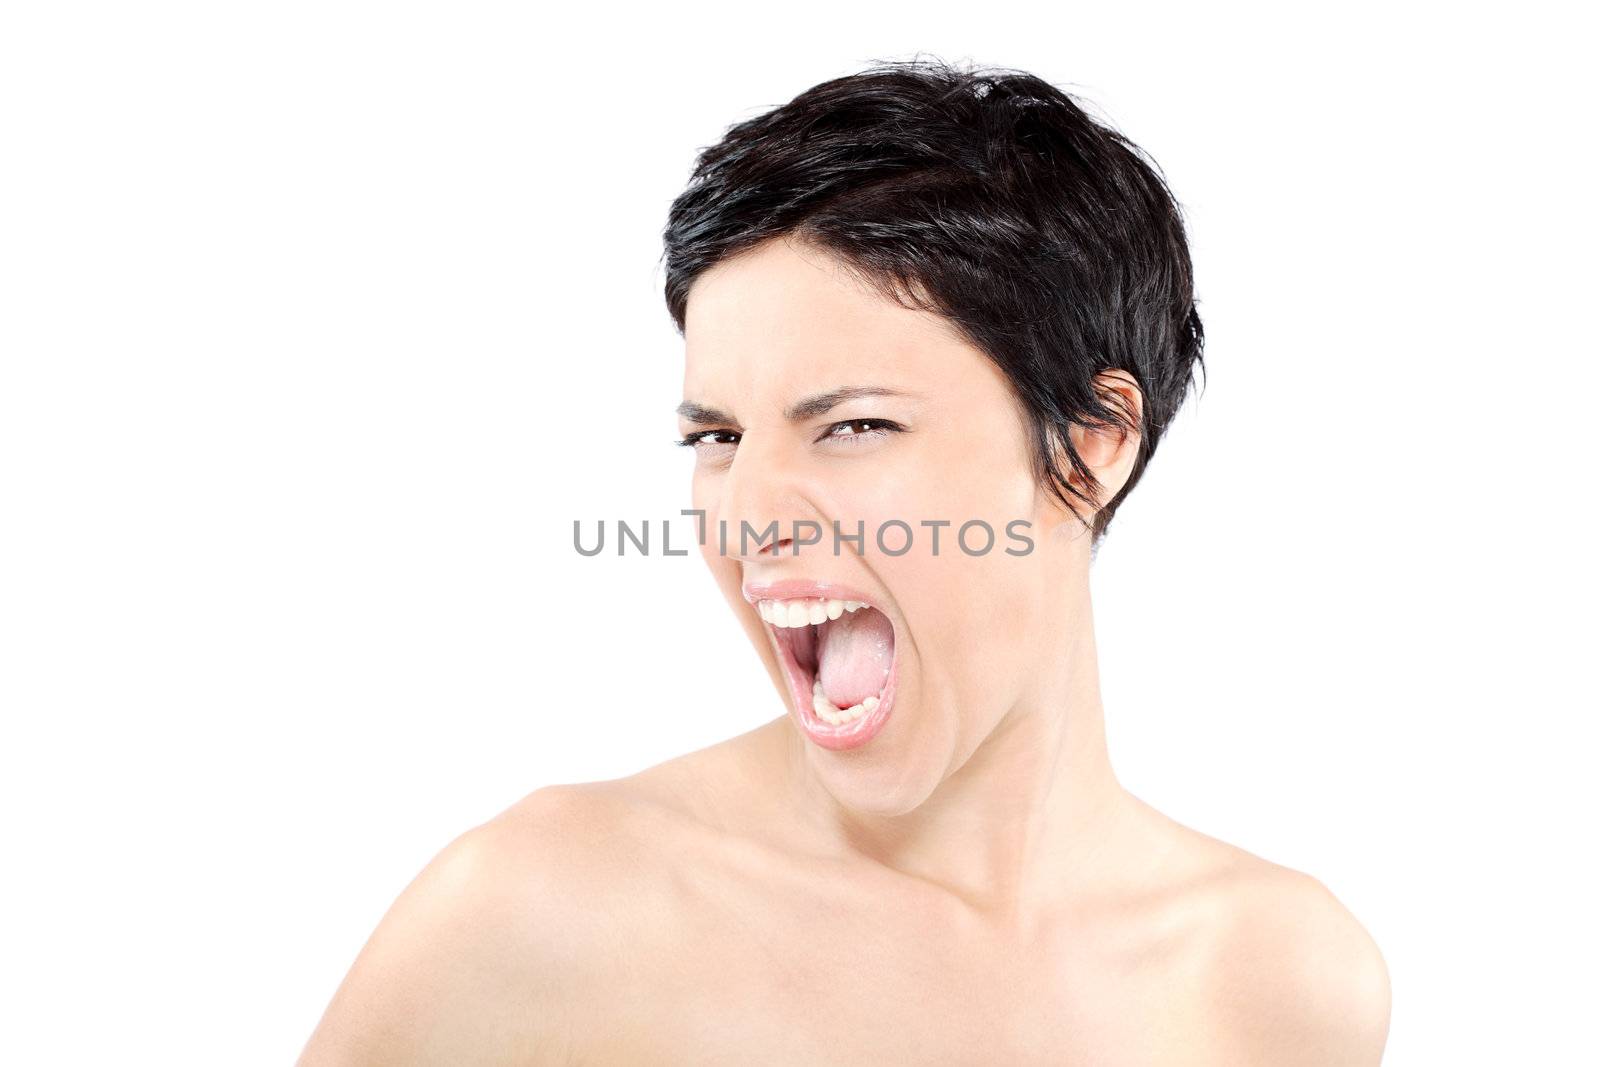 beautiful girl with short black hair, against white background